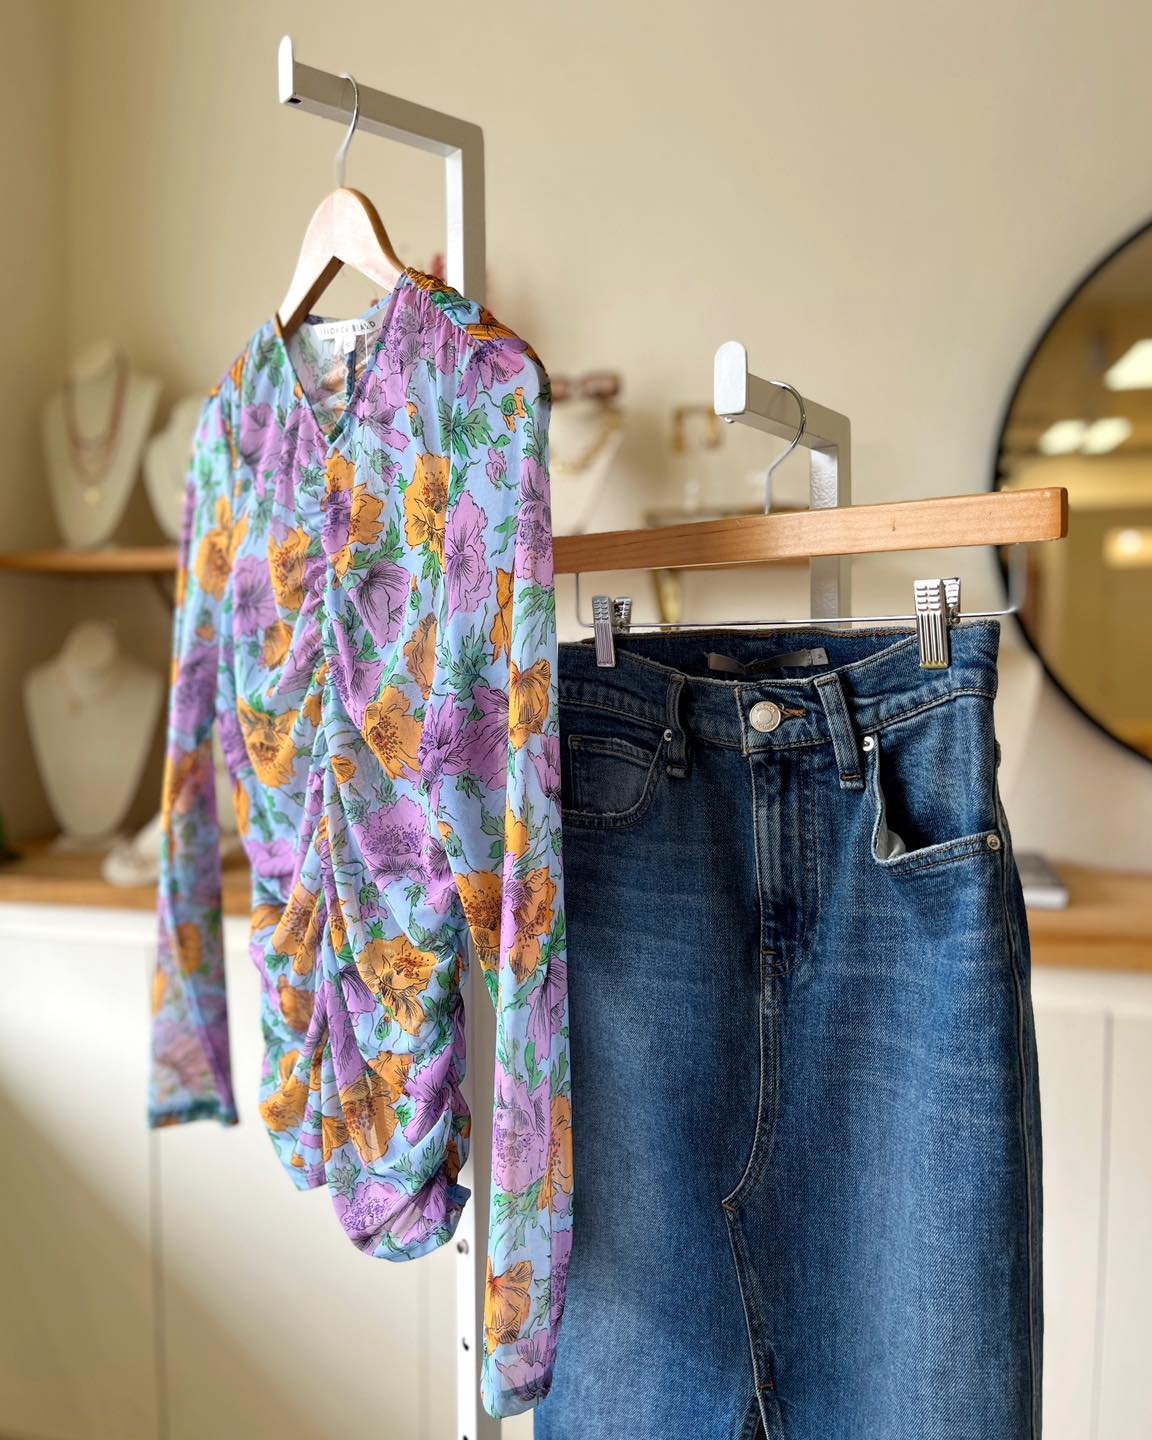 Denim done three different ways from three of our fave denim labels: a maxi skirt from Hudson, brand new Mother jeans and a pair of shorts by Joe&rsquo;s Jeans. Mix and match with our extensive collection of tops from brands like Veronica Beard, Elev